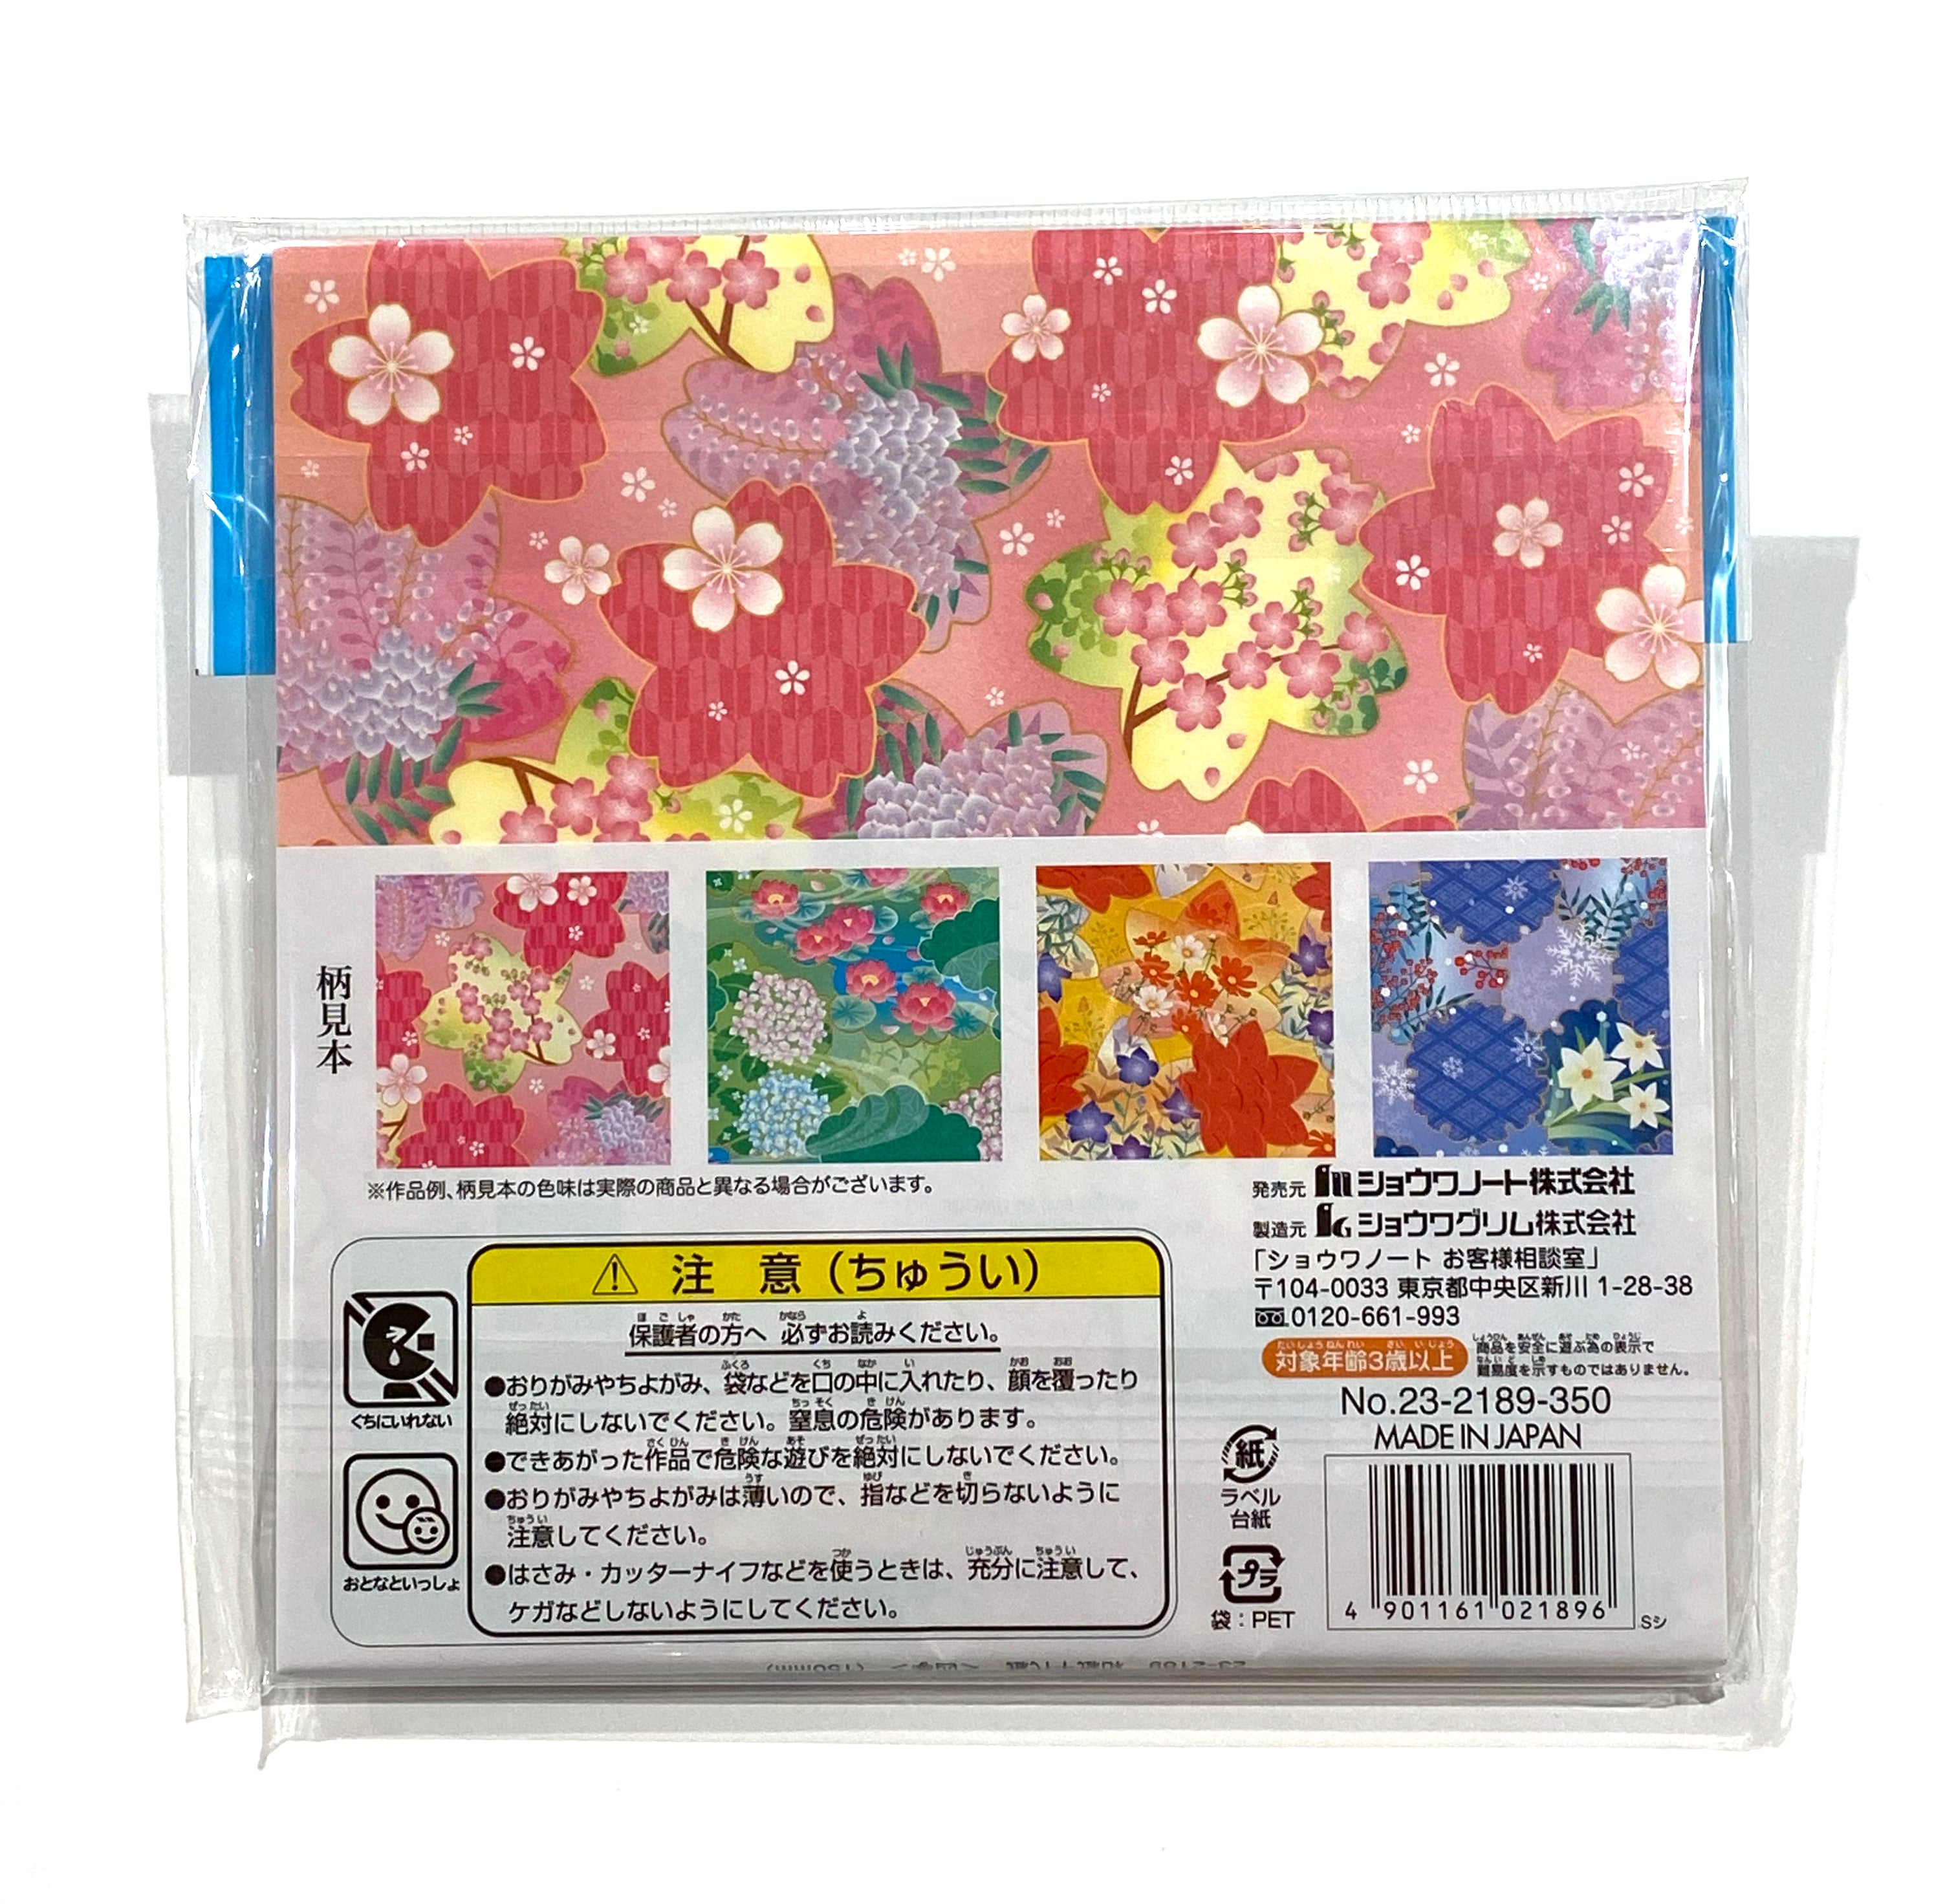 Floral Four Seasons Origami Paper